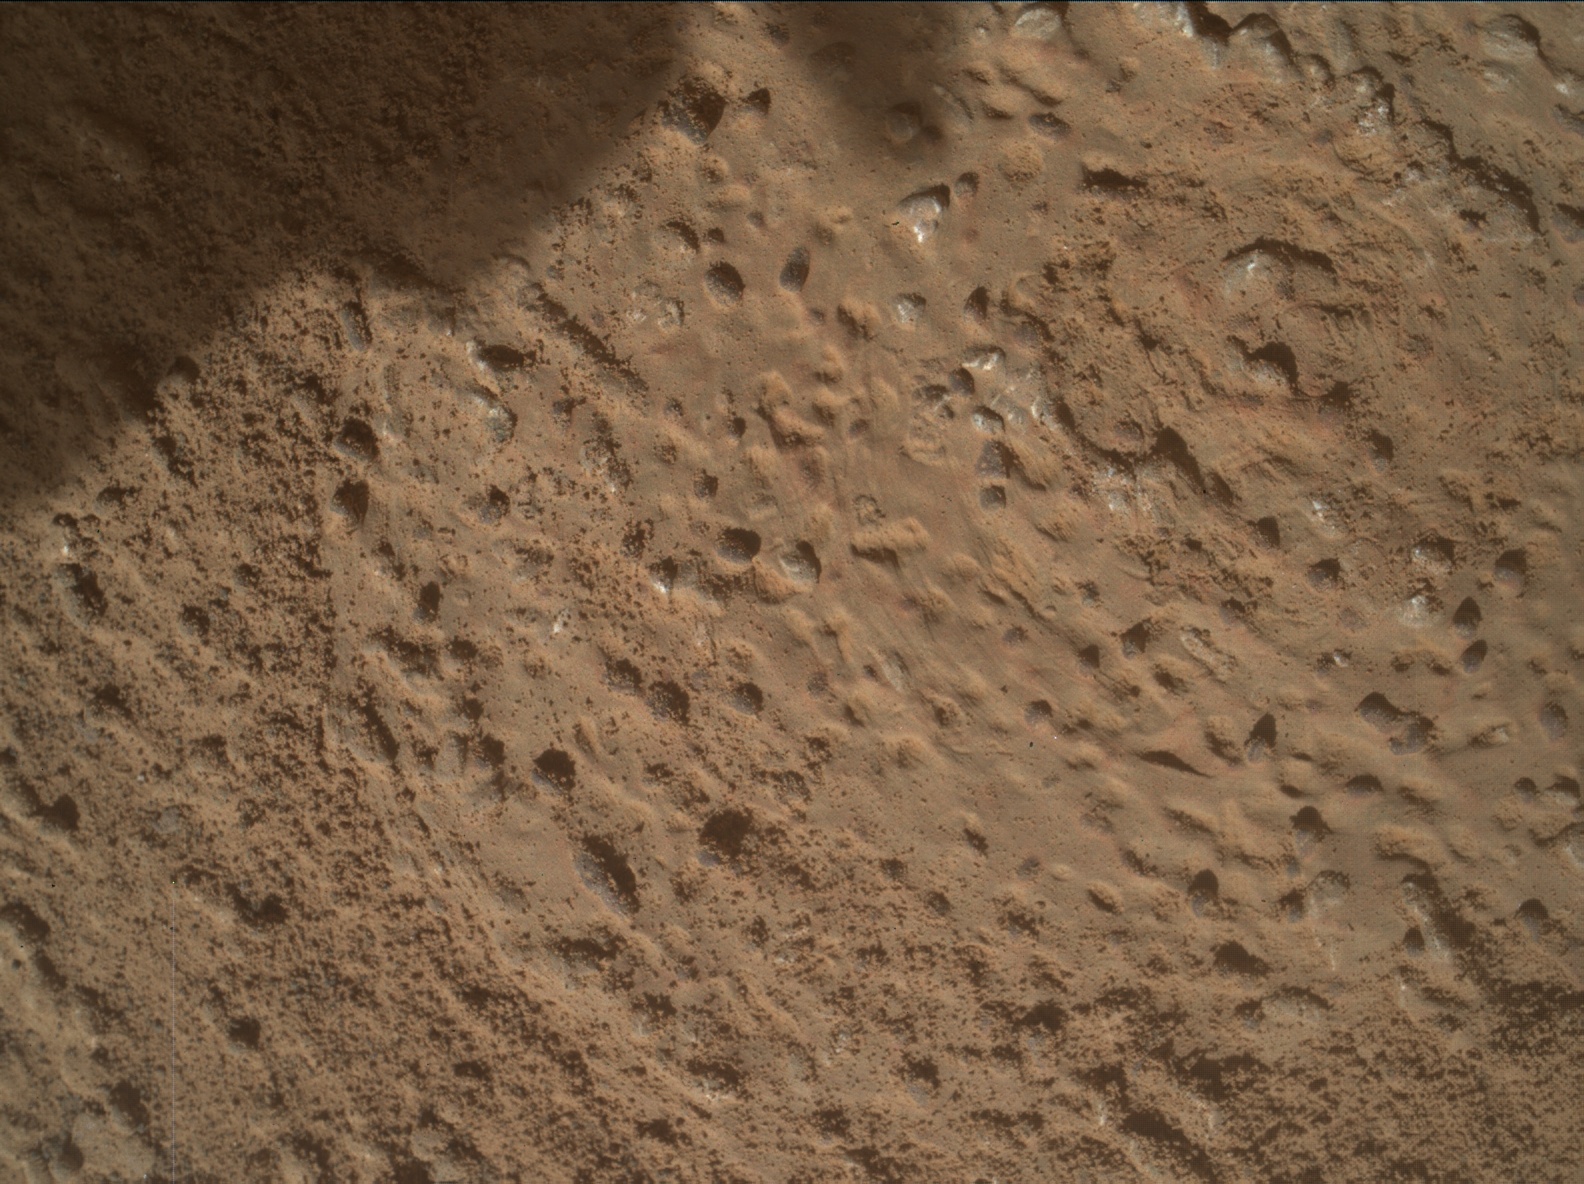 Nasa's Mars rover Curiosity acquired this image using its Mars Hand Lens Imager (MAHLI) on Sol 3224